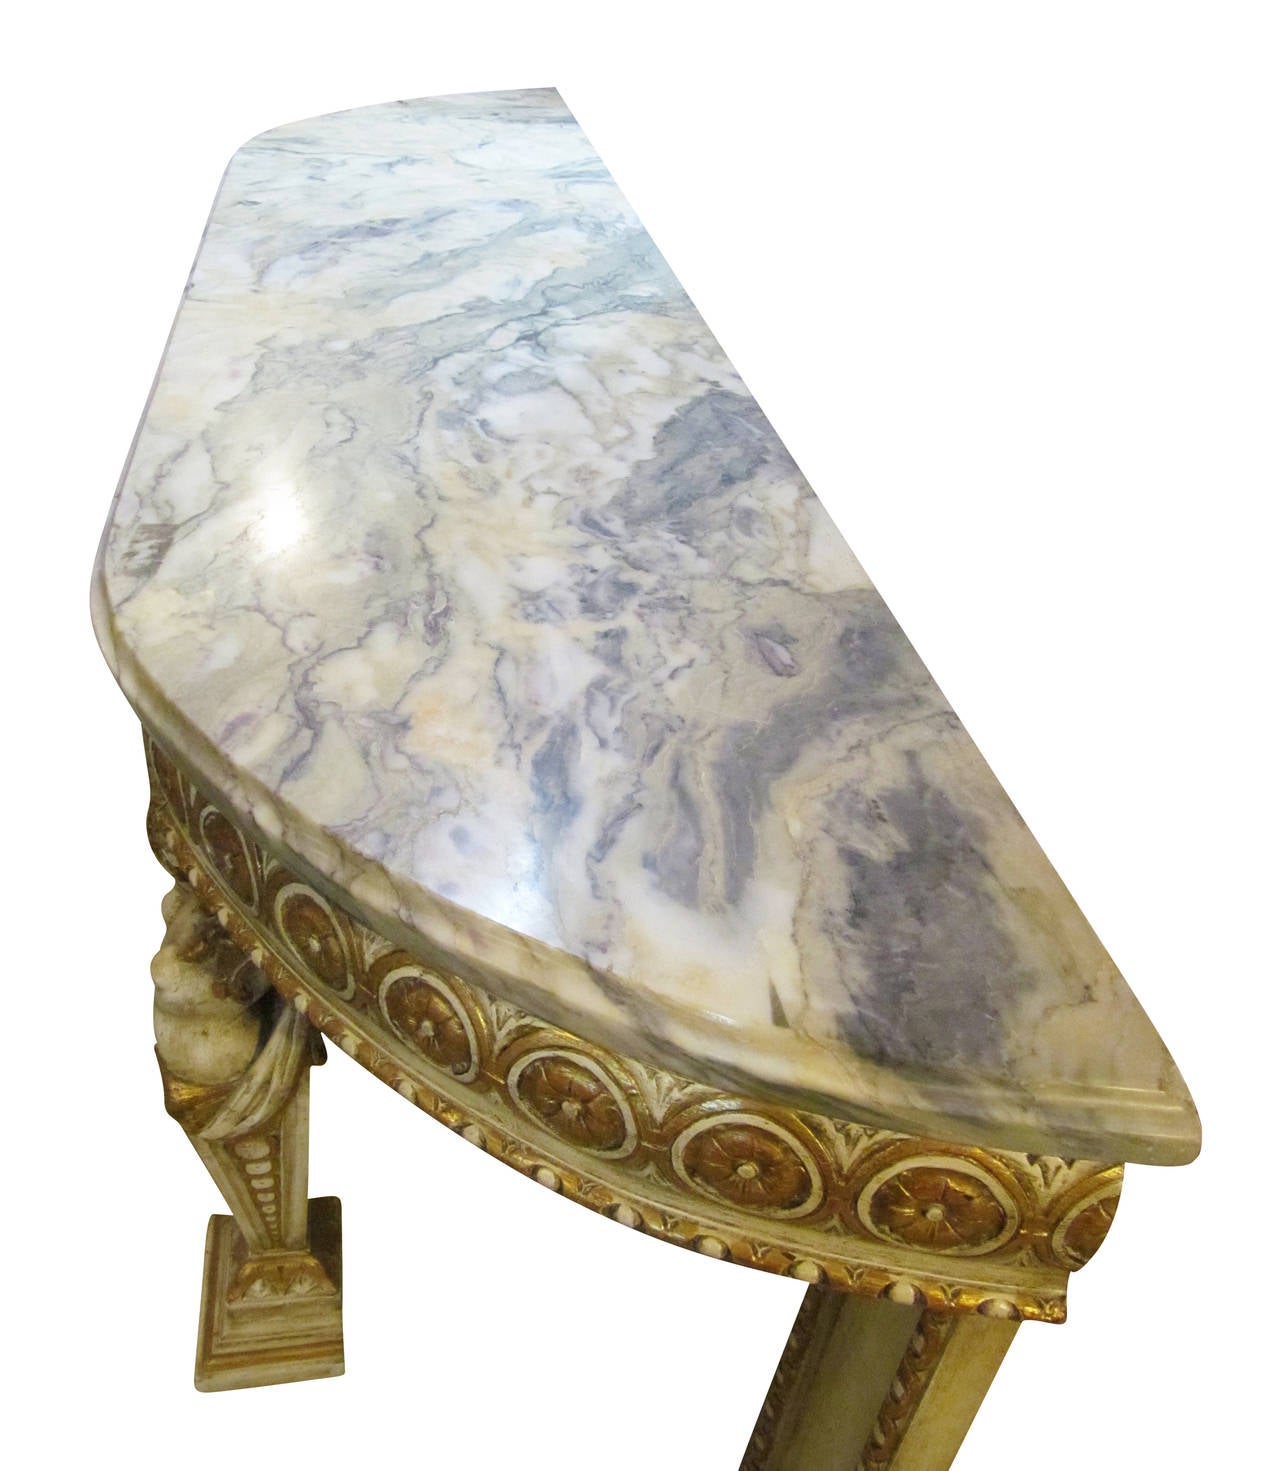 Mid-20th Century Italian Marble-Top Console Made of Carved Wood, Gilded and Painted Base, 1940s